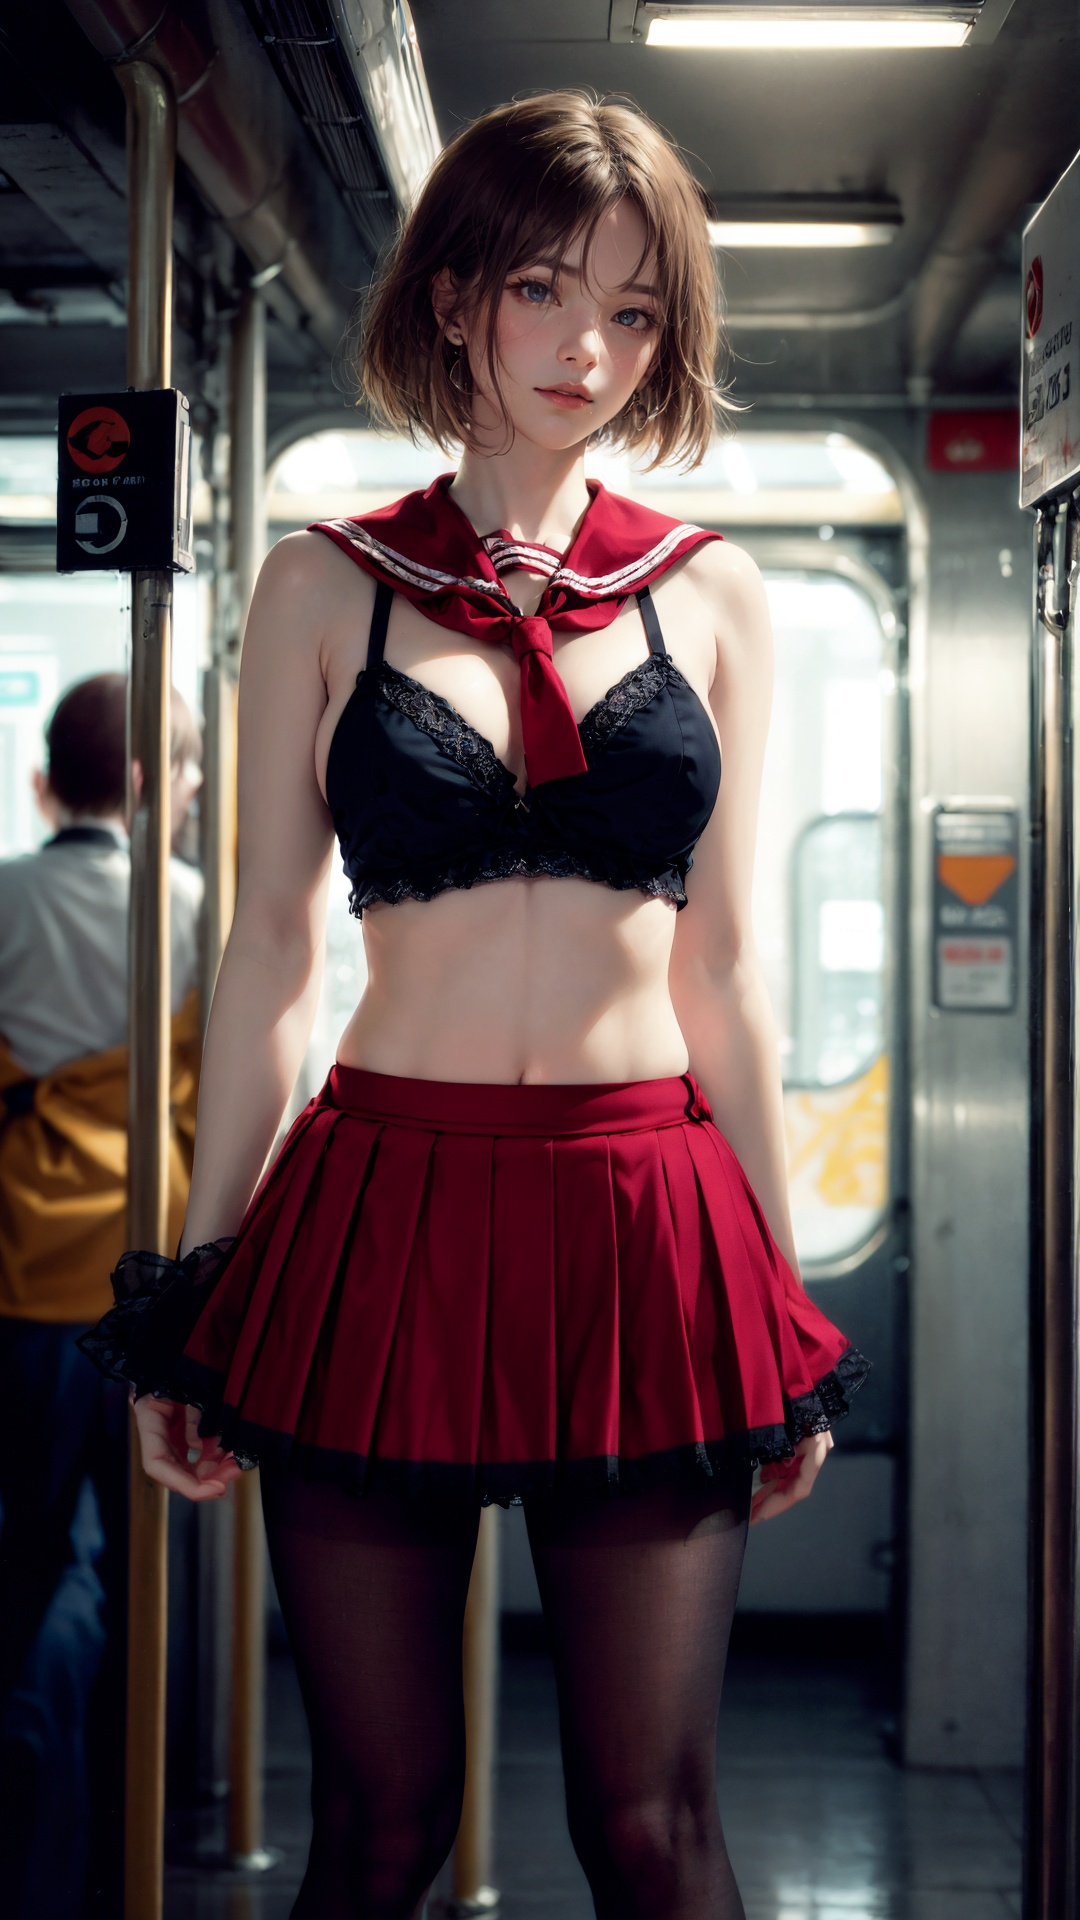 tutututu,red_skirt, school uniform, black_bra, underwear, lingerie, midriff, red_sailor_collar, high heels,(black pantyhose), photography, Alice Ingram, riding the subway, long auburn hair, a softened wry smile-subdued excited bliss, soft lighting on face, realistic skin-clothing-hair textures, carpeted fog sky blue eyes, Beautiful Real Textures & Delicate Aesthetics, Remarkable Homage to Silent Hill Energy by Psykhosis., noise, JPEG artifacts, poor lighting, low light, underexposed, high contrast, <lora:tutuZFV5_00004:0.8> 